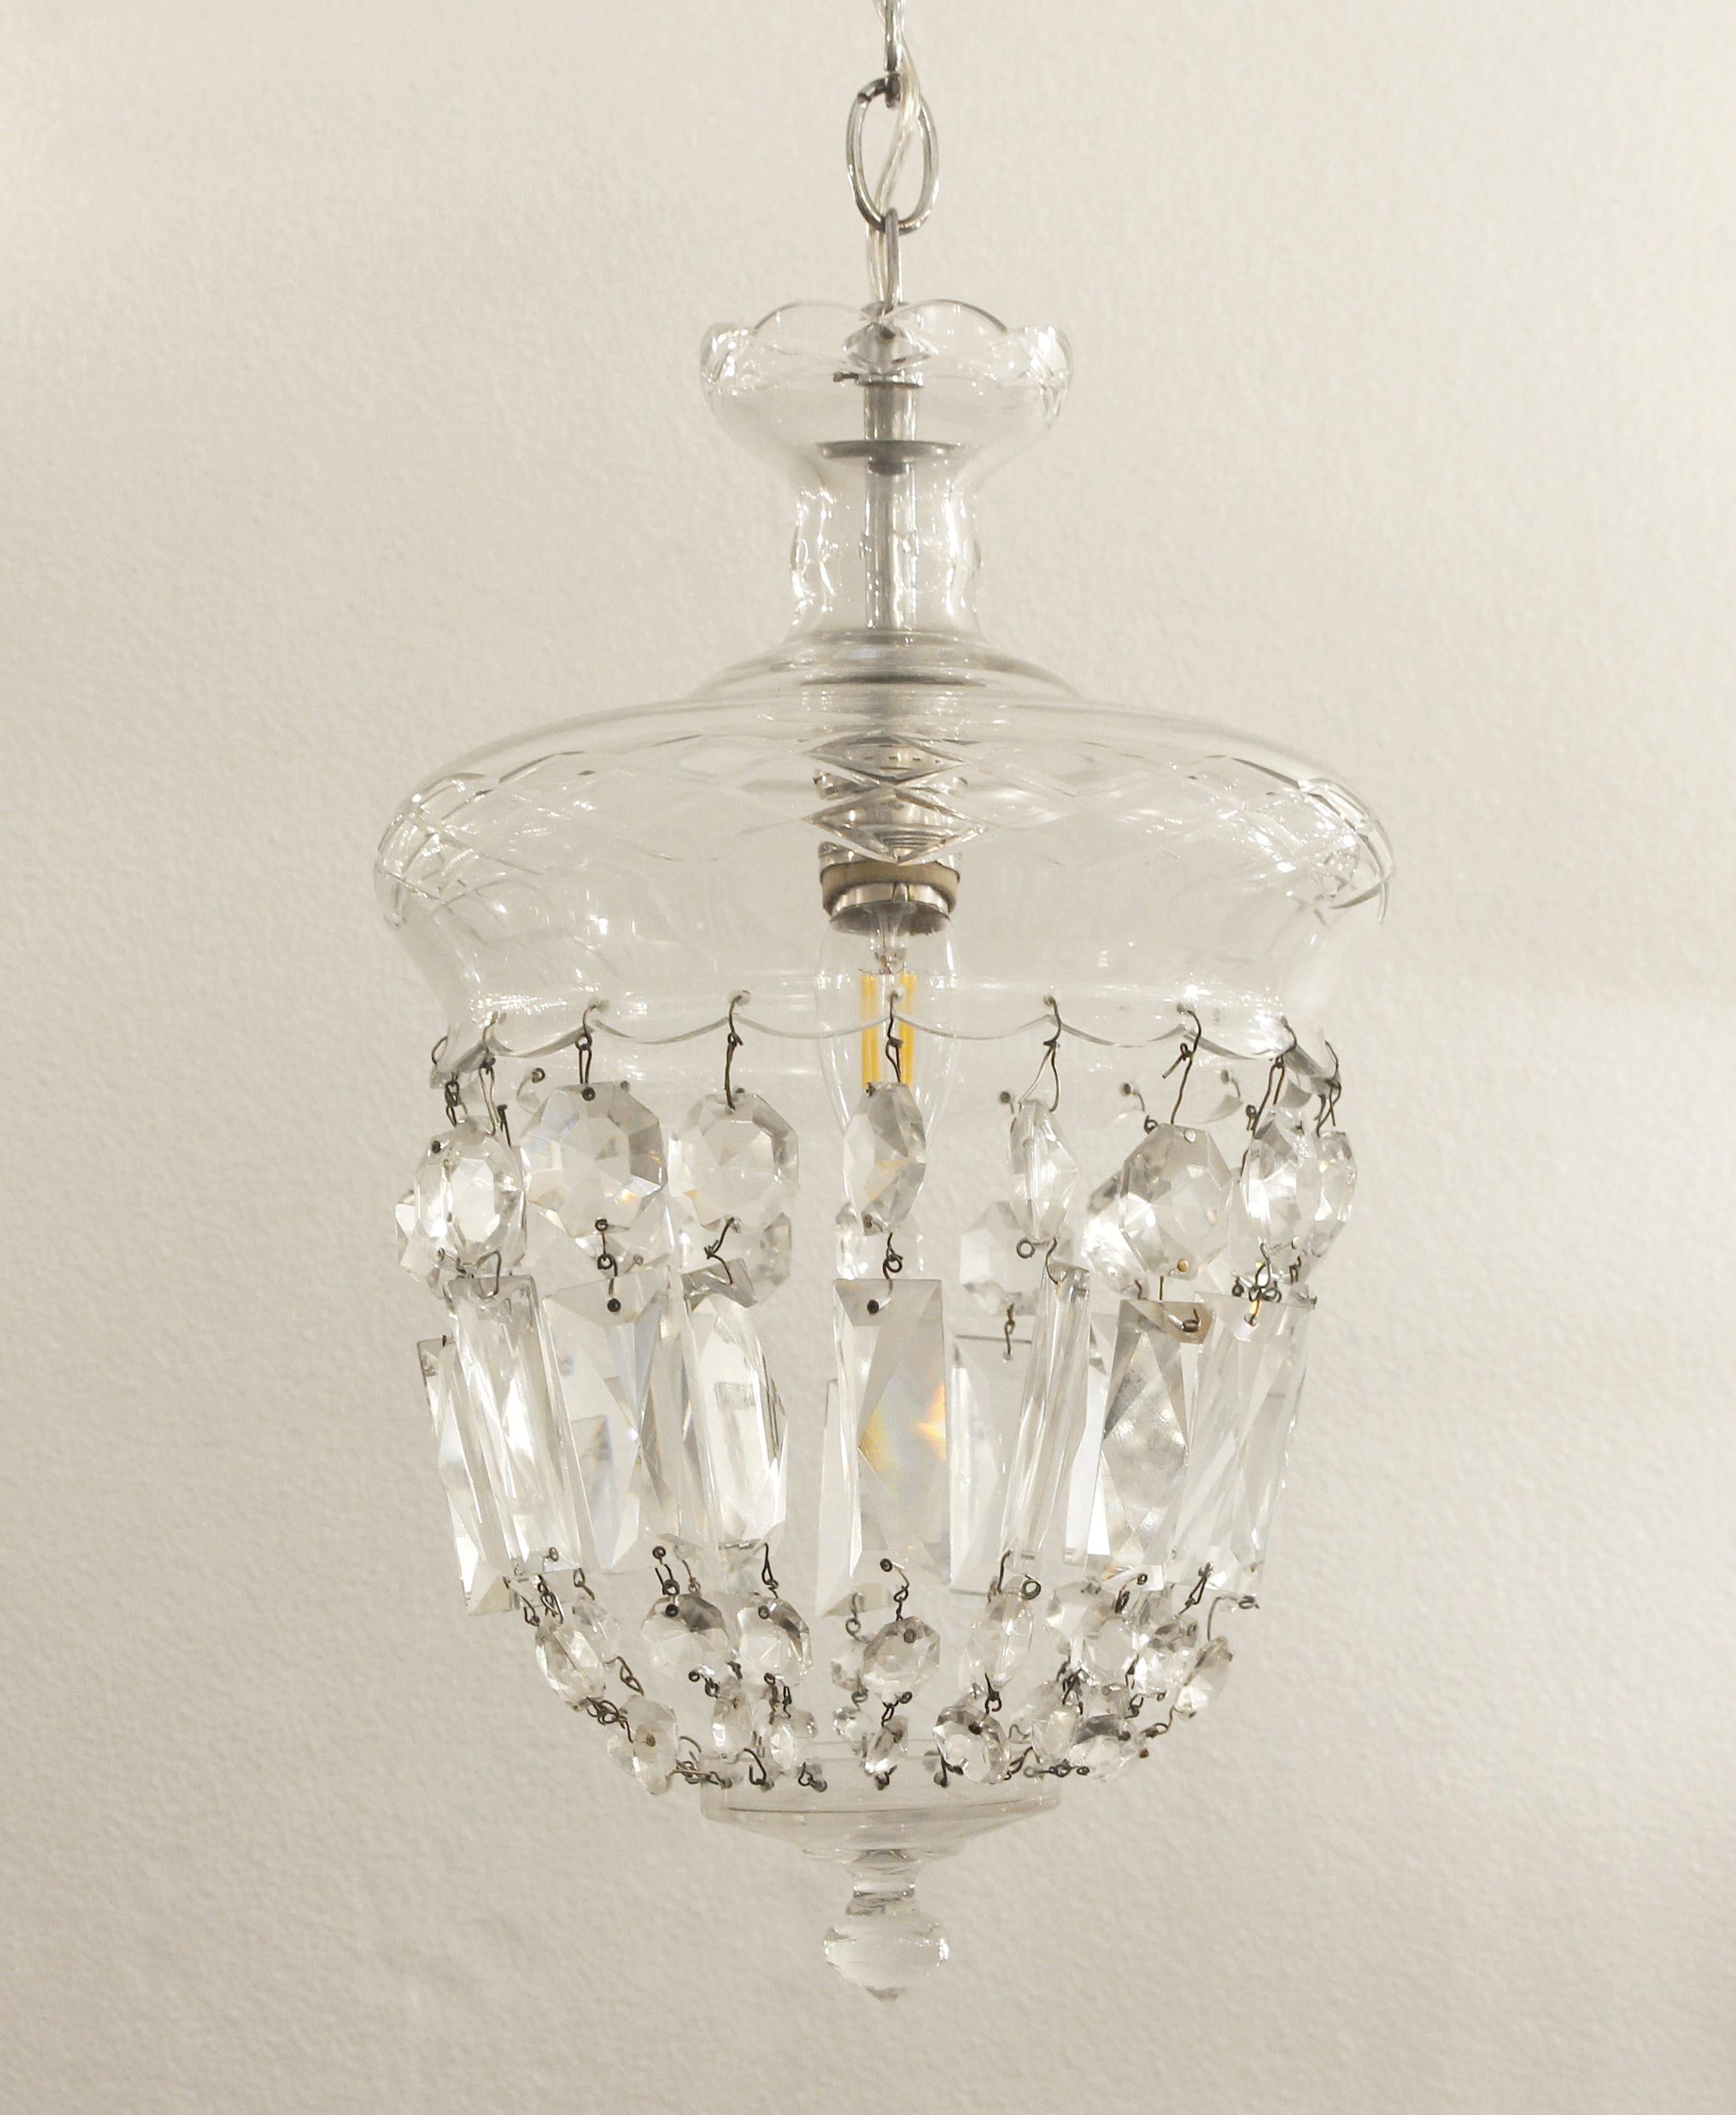 1990s clear glass pendant light with a chrome fitter and single socket. Done in a bell jar style. This can be seen at our 302 Bowery location in Manhattan.